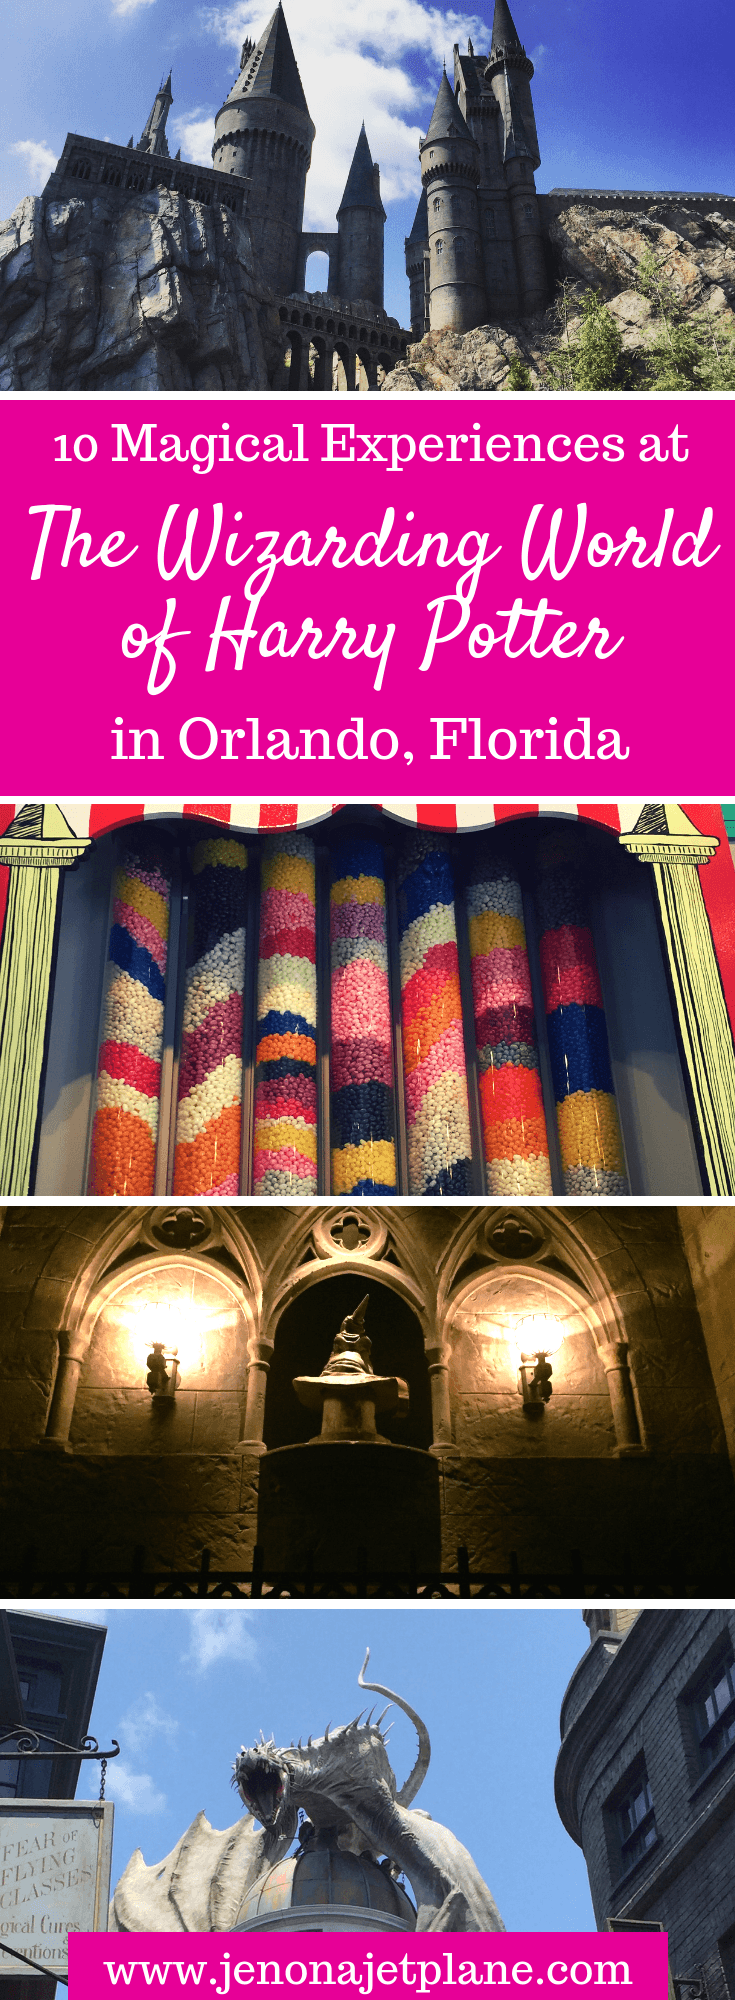 Are you planning a visit to Harry Potter World in Universal Studios, Orlando? Here are 10 experiences you can't miss, from riding the Hogwarts Express to touring Gringotts Bank. Save this pin to your Florida travel board for future reference. #harrypotter #universalstudios #themeparks #harrypotterworld #visitflorida #orlandoflorida #floridatrip #floridatravel